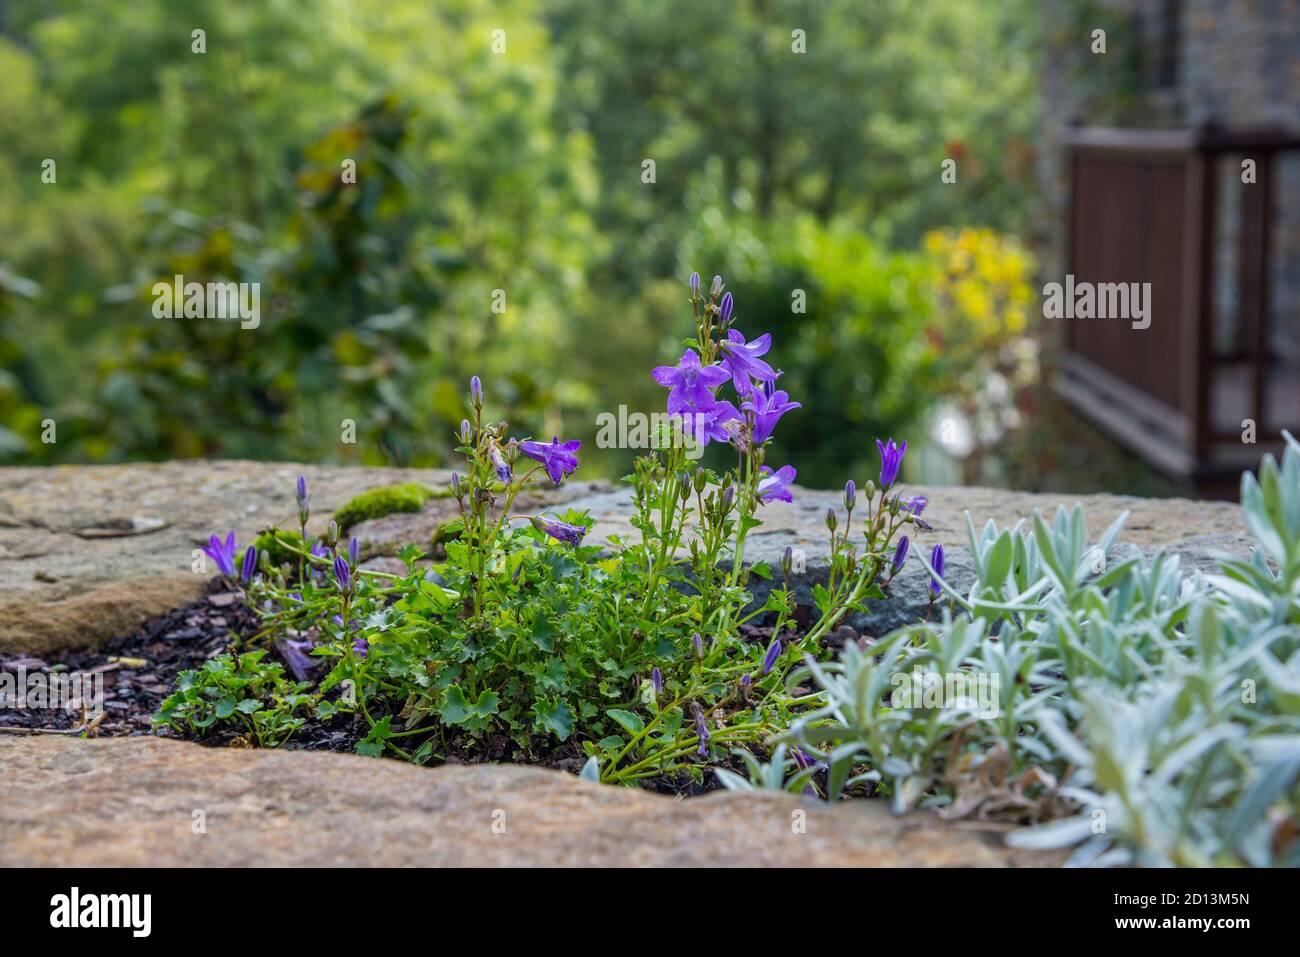 Blue bell flower (campanula) in the flowerbed Stock Photo